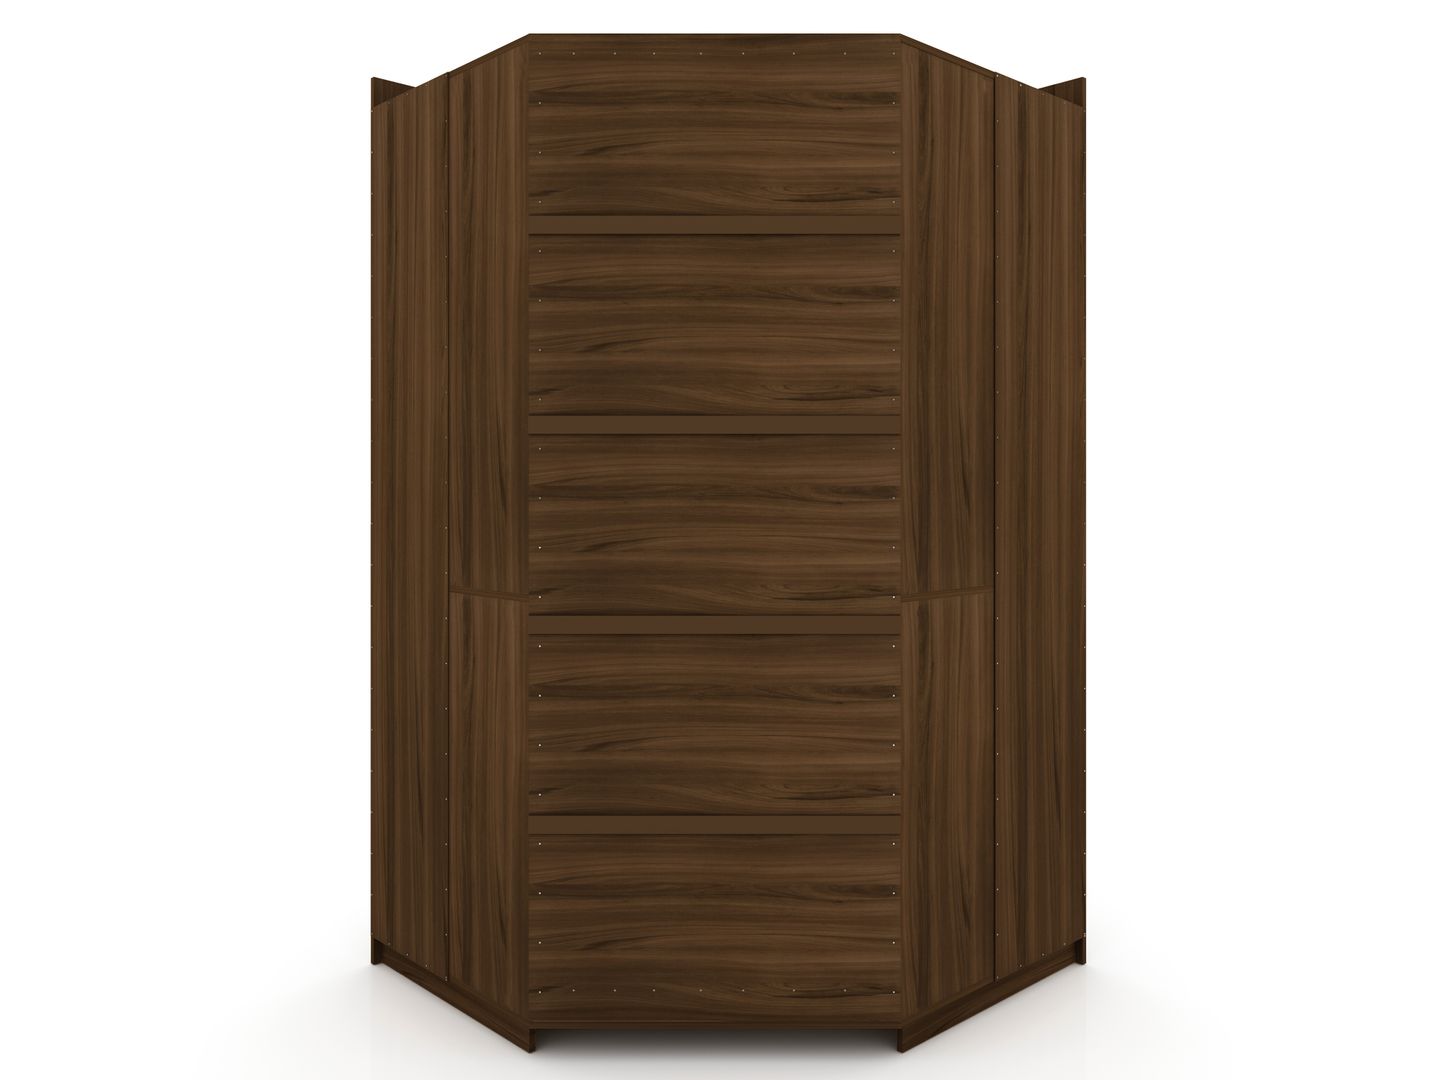 Manhattan Comfort Mulberry 2.0 Semi Open 3 Sectional Modern Wardrobe Corner Closet with 4 Drawers - Set of 3 in Brown